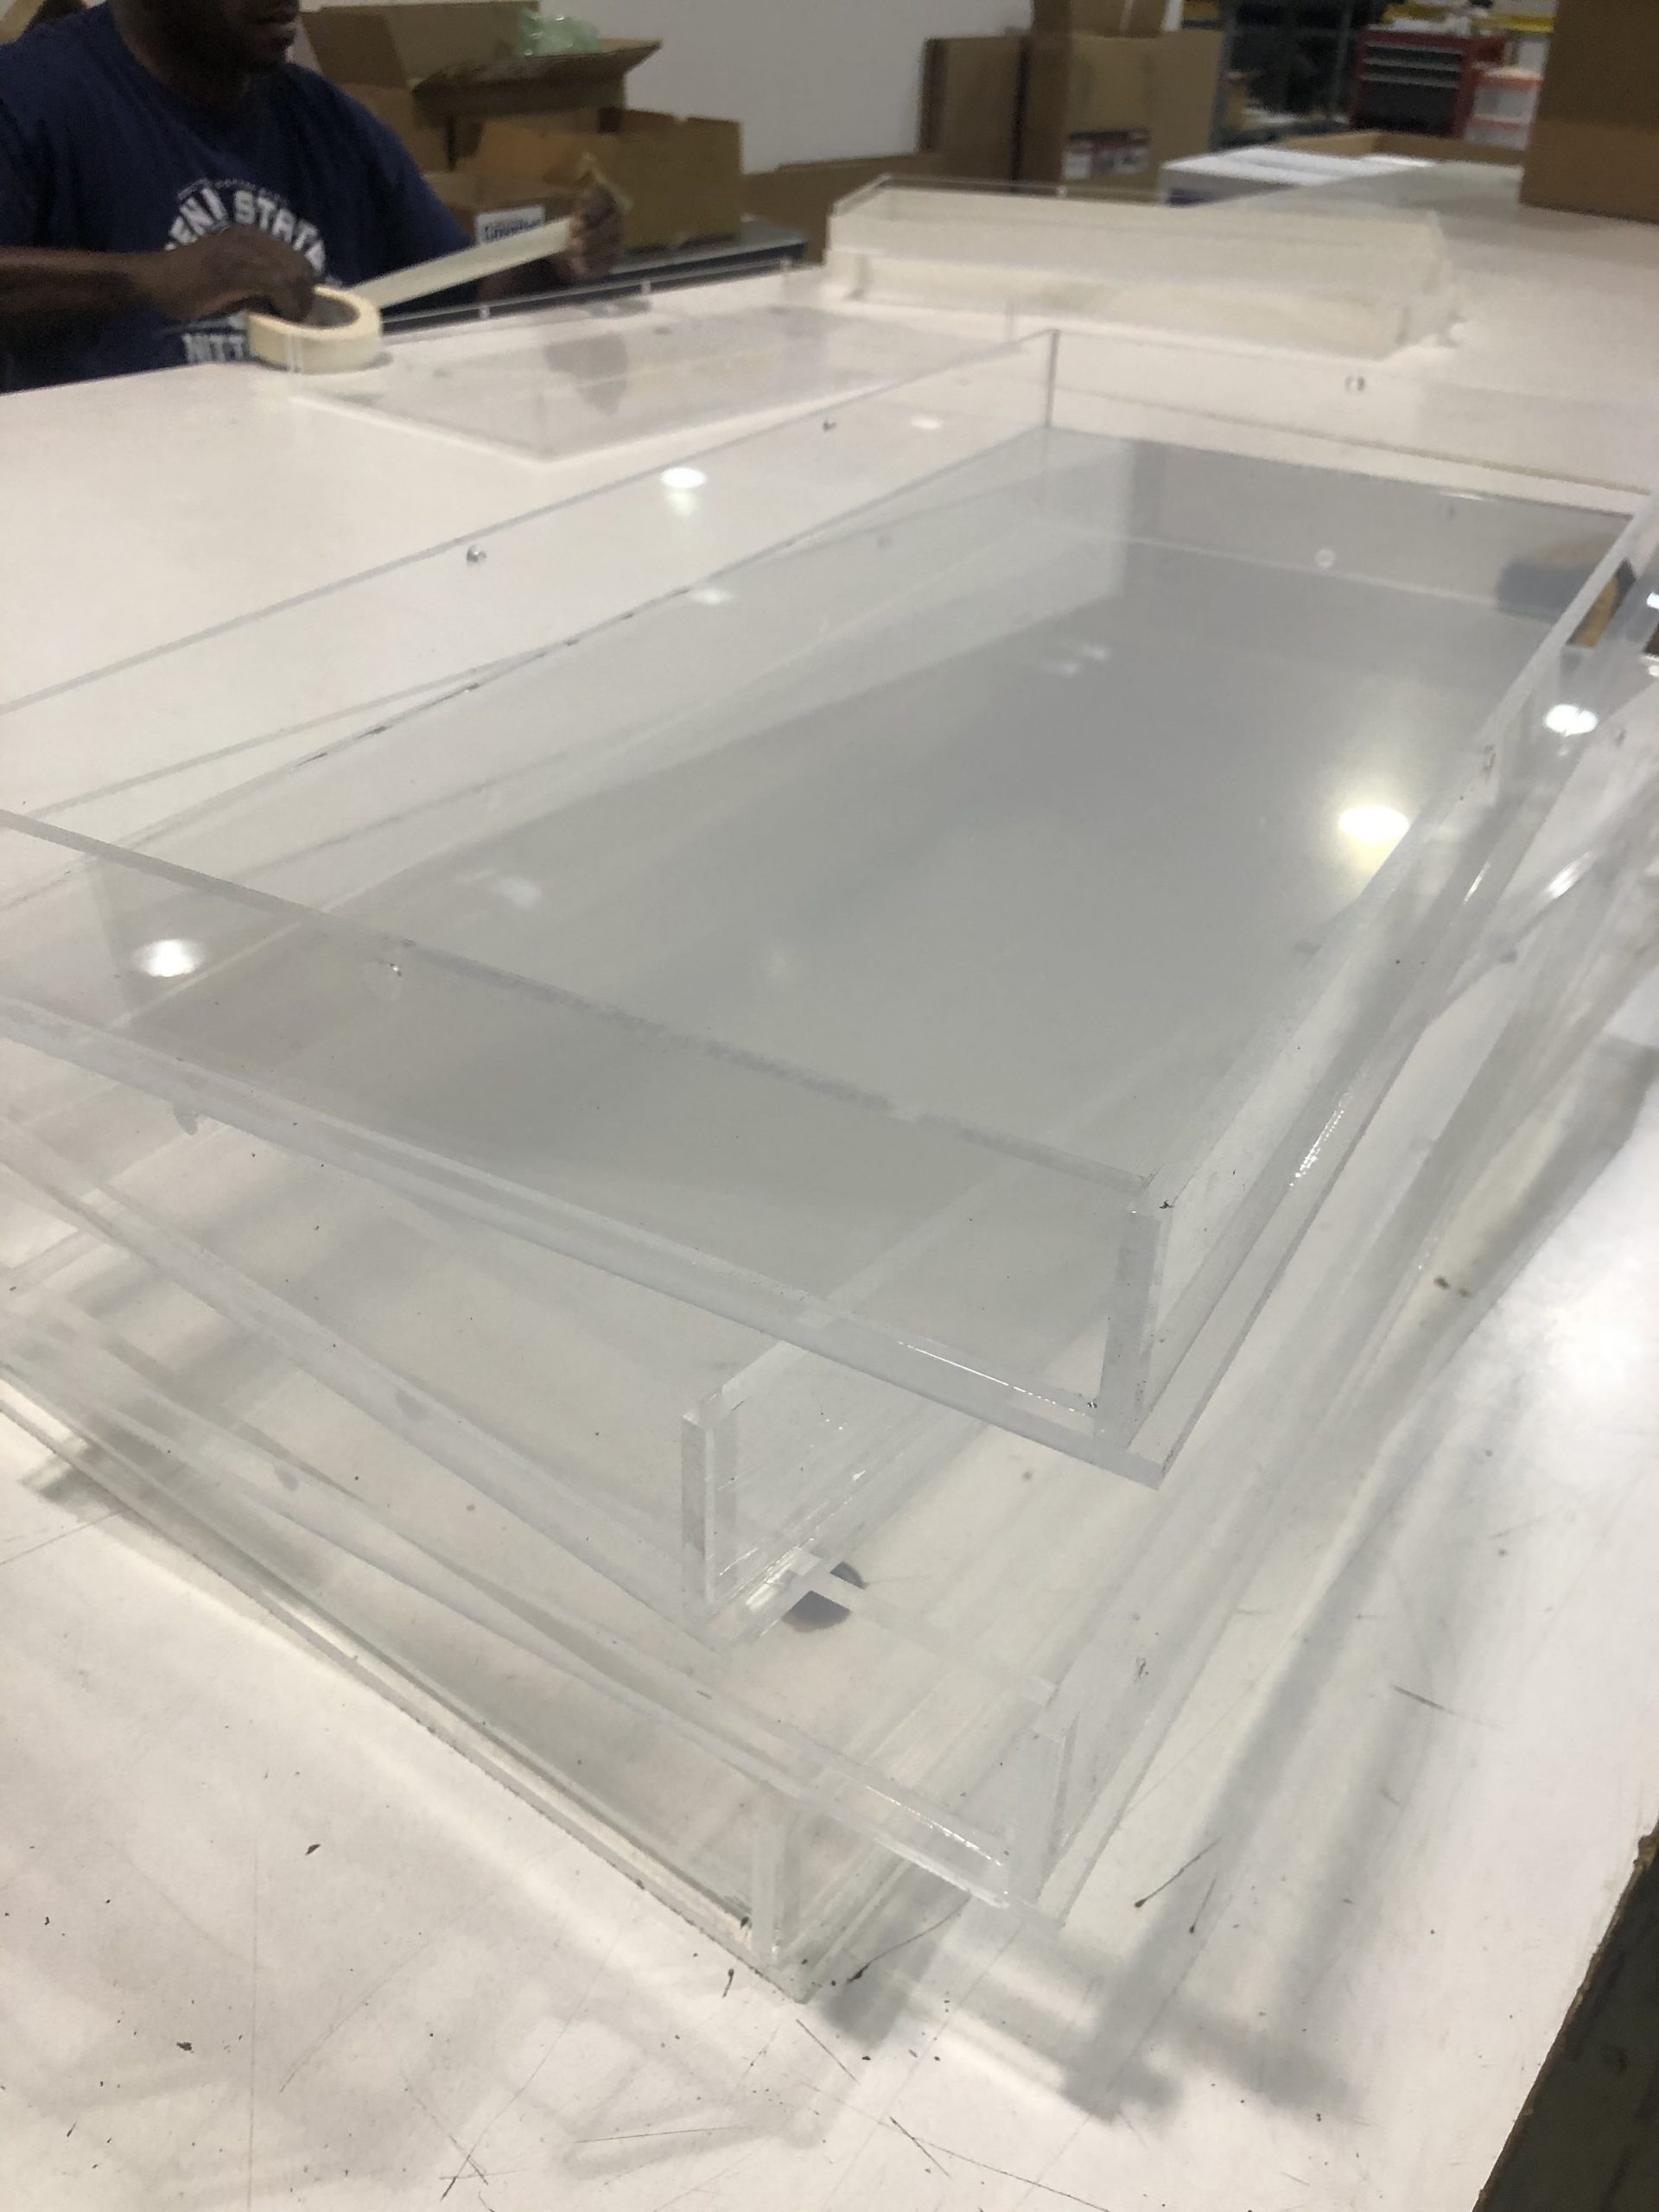 dustcover / vitrines for acrylic display cases